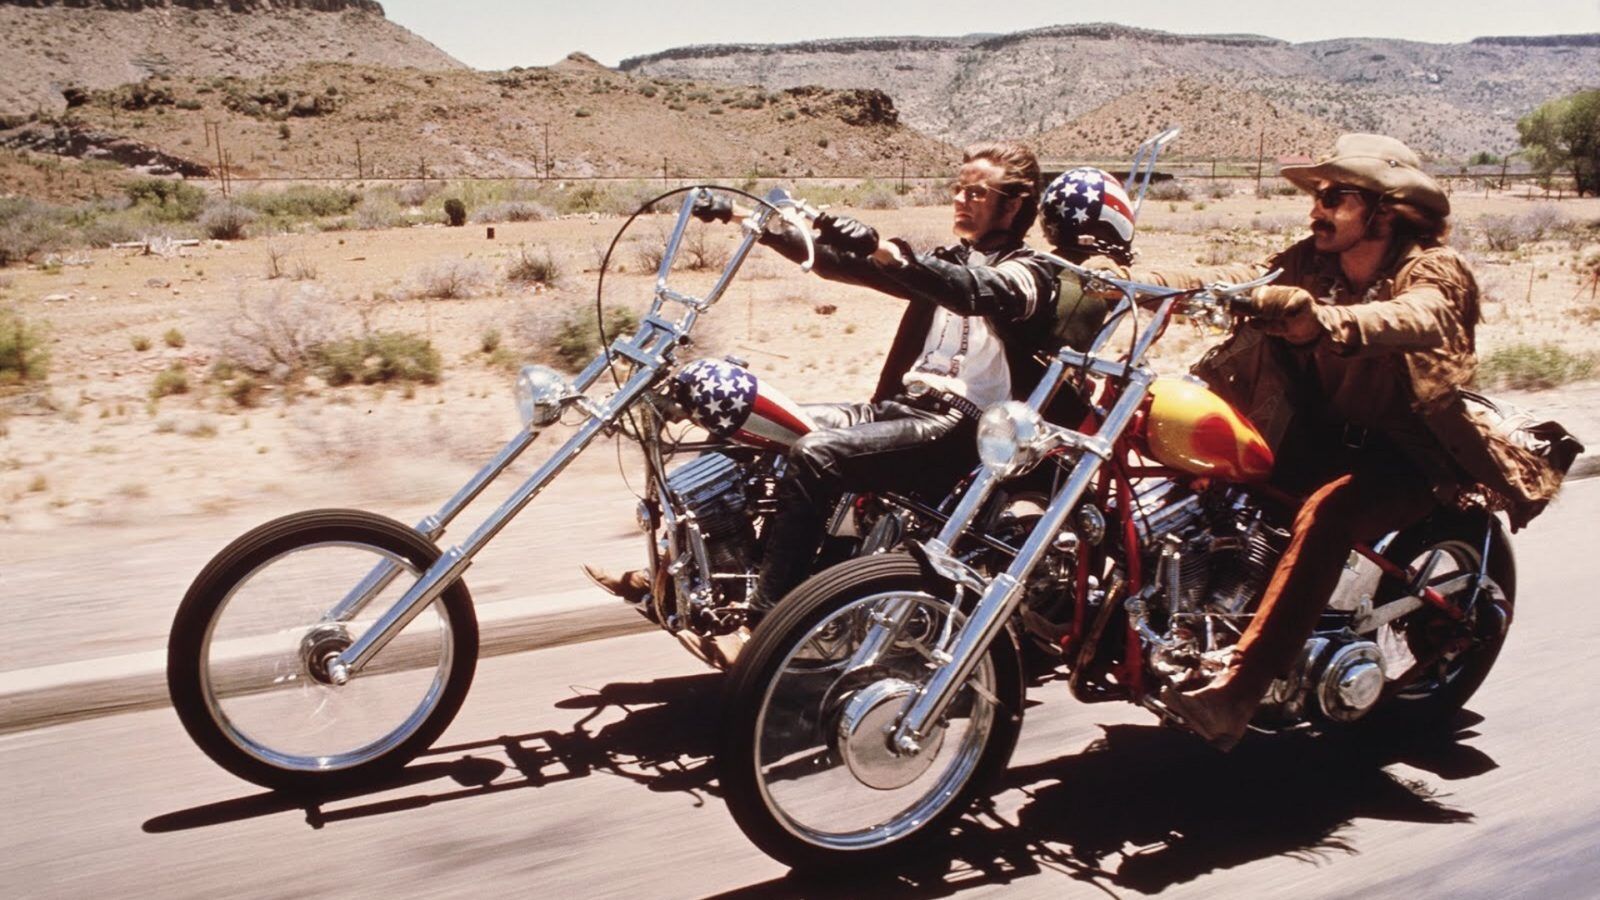 10 unforgettable motorcycles in films that you would want to ride